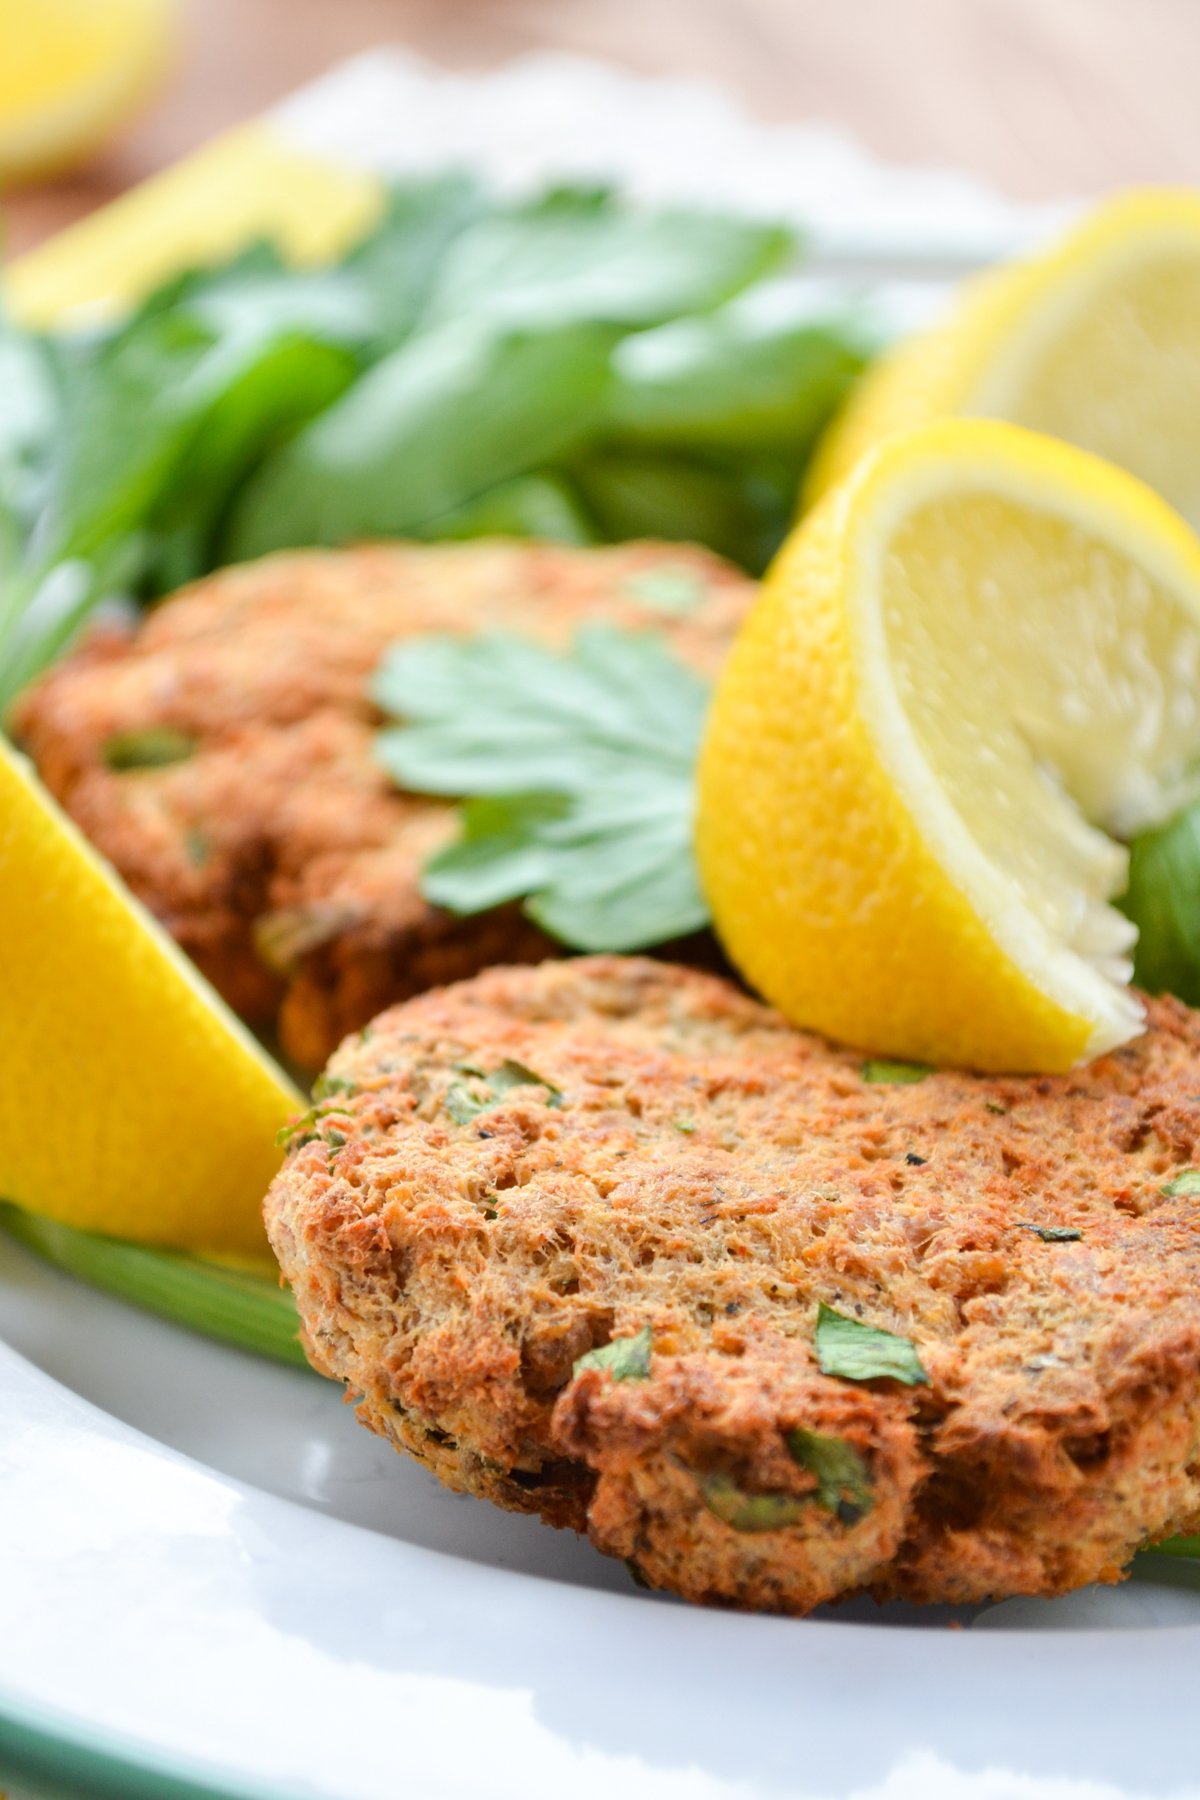 A plate of salmon patties, garnished with parsley and lemon wedges.